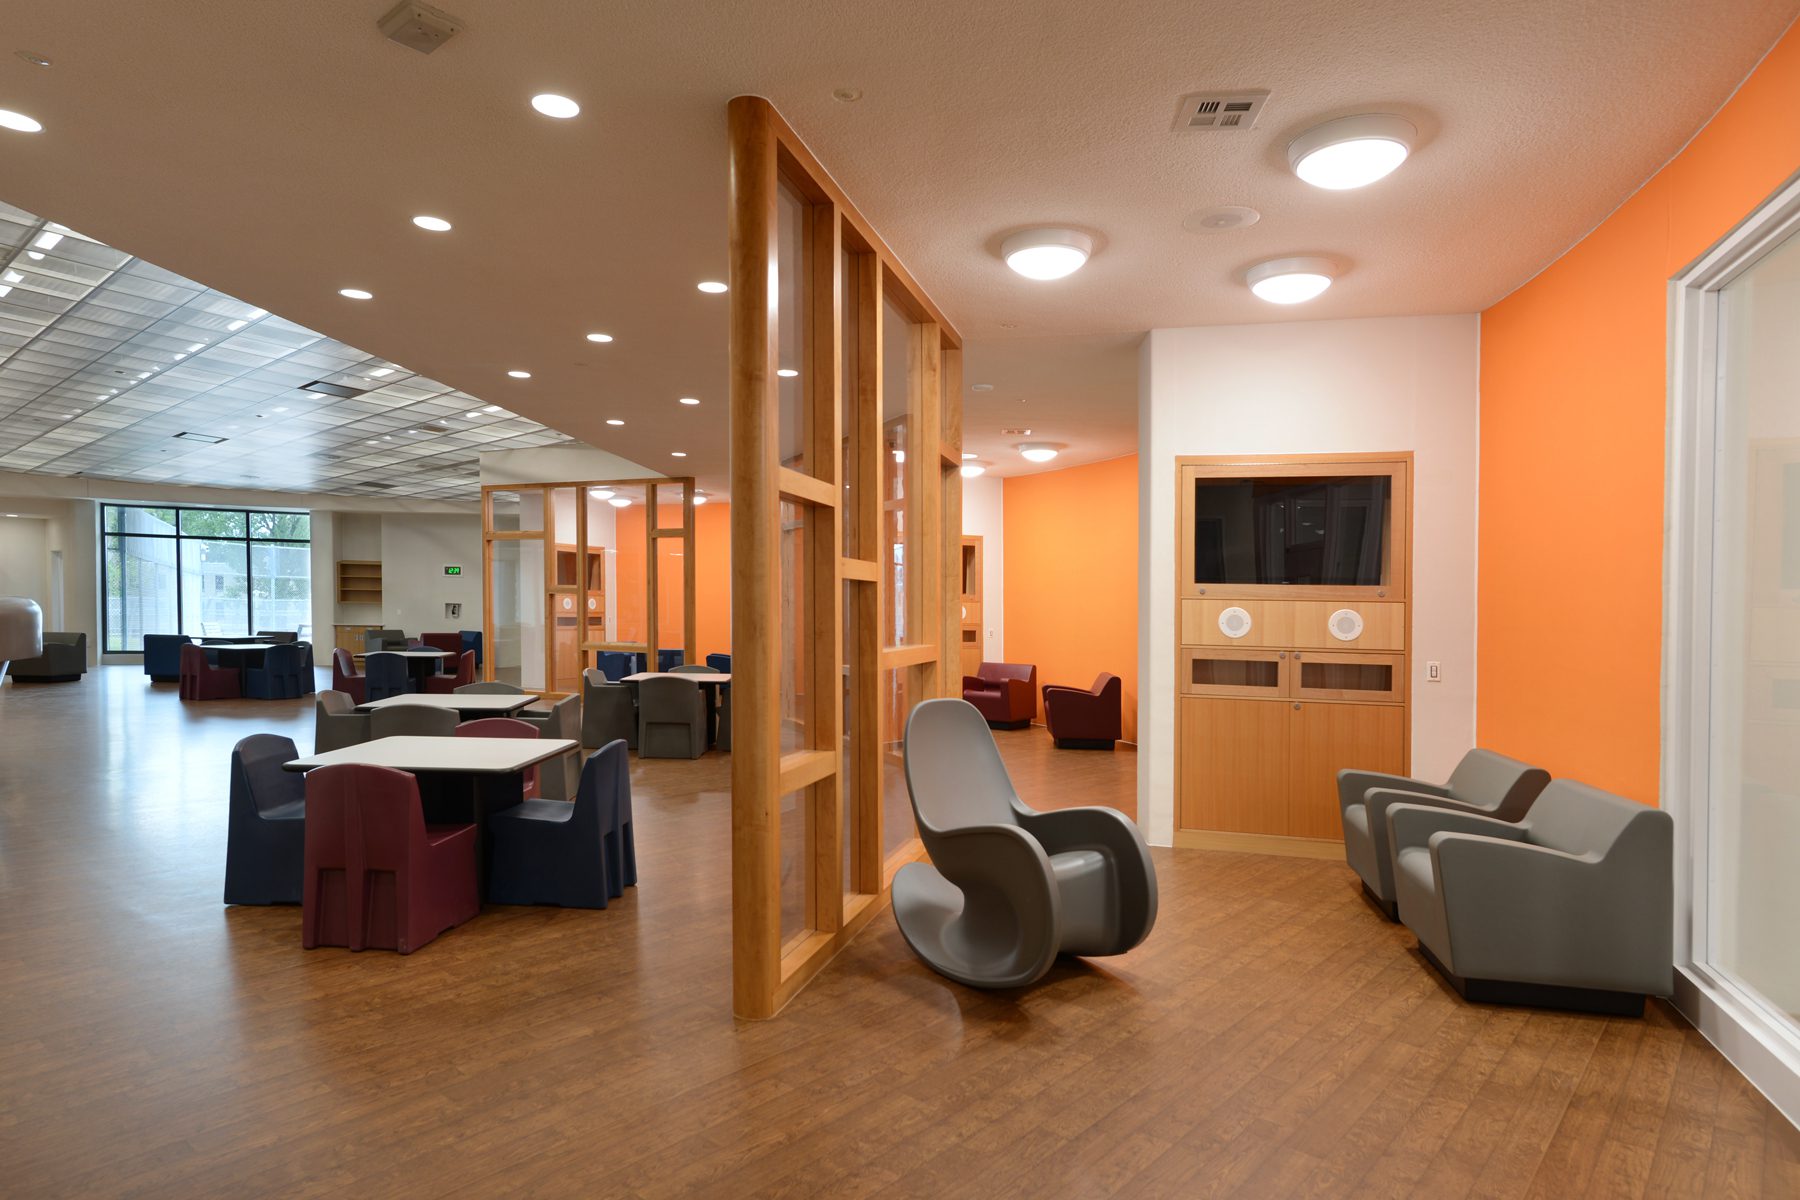 Behavioral Healthcare common area featuring Rocksmart rocking chairs